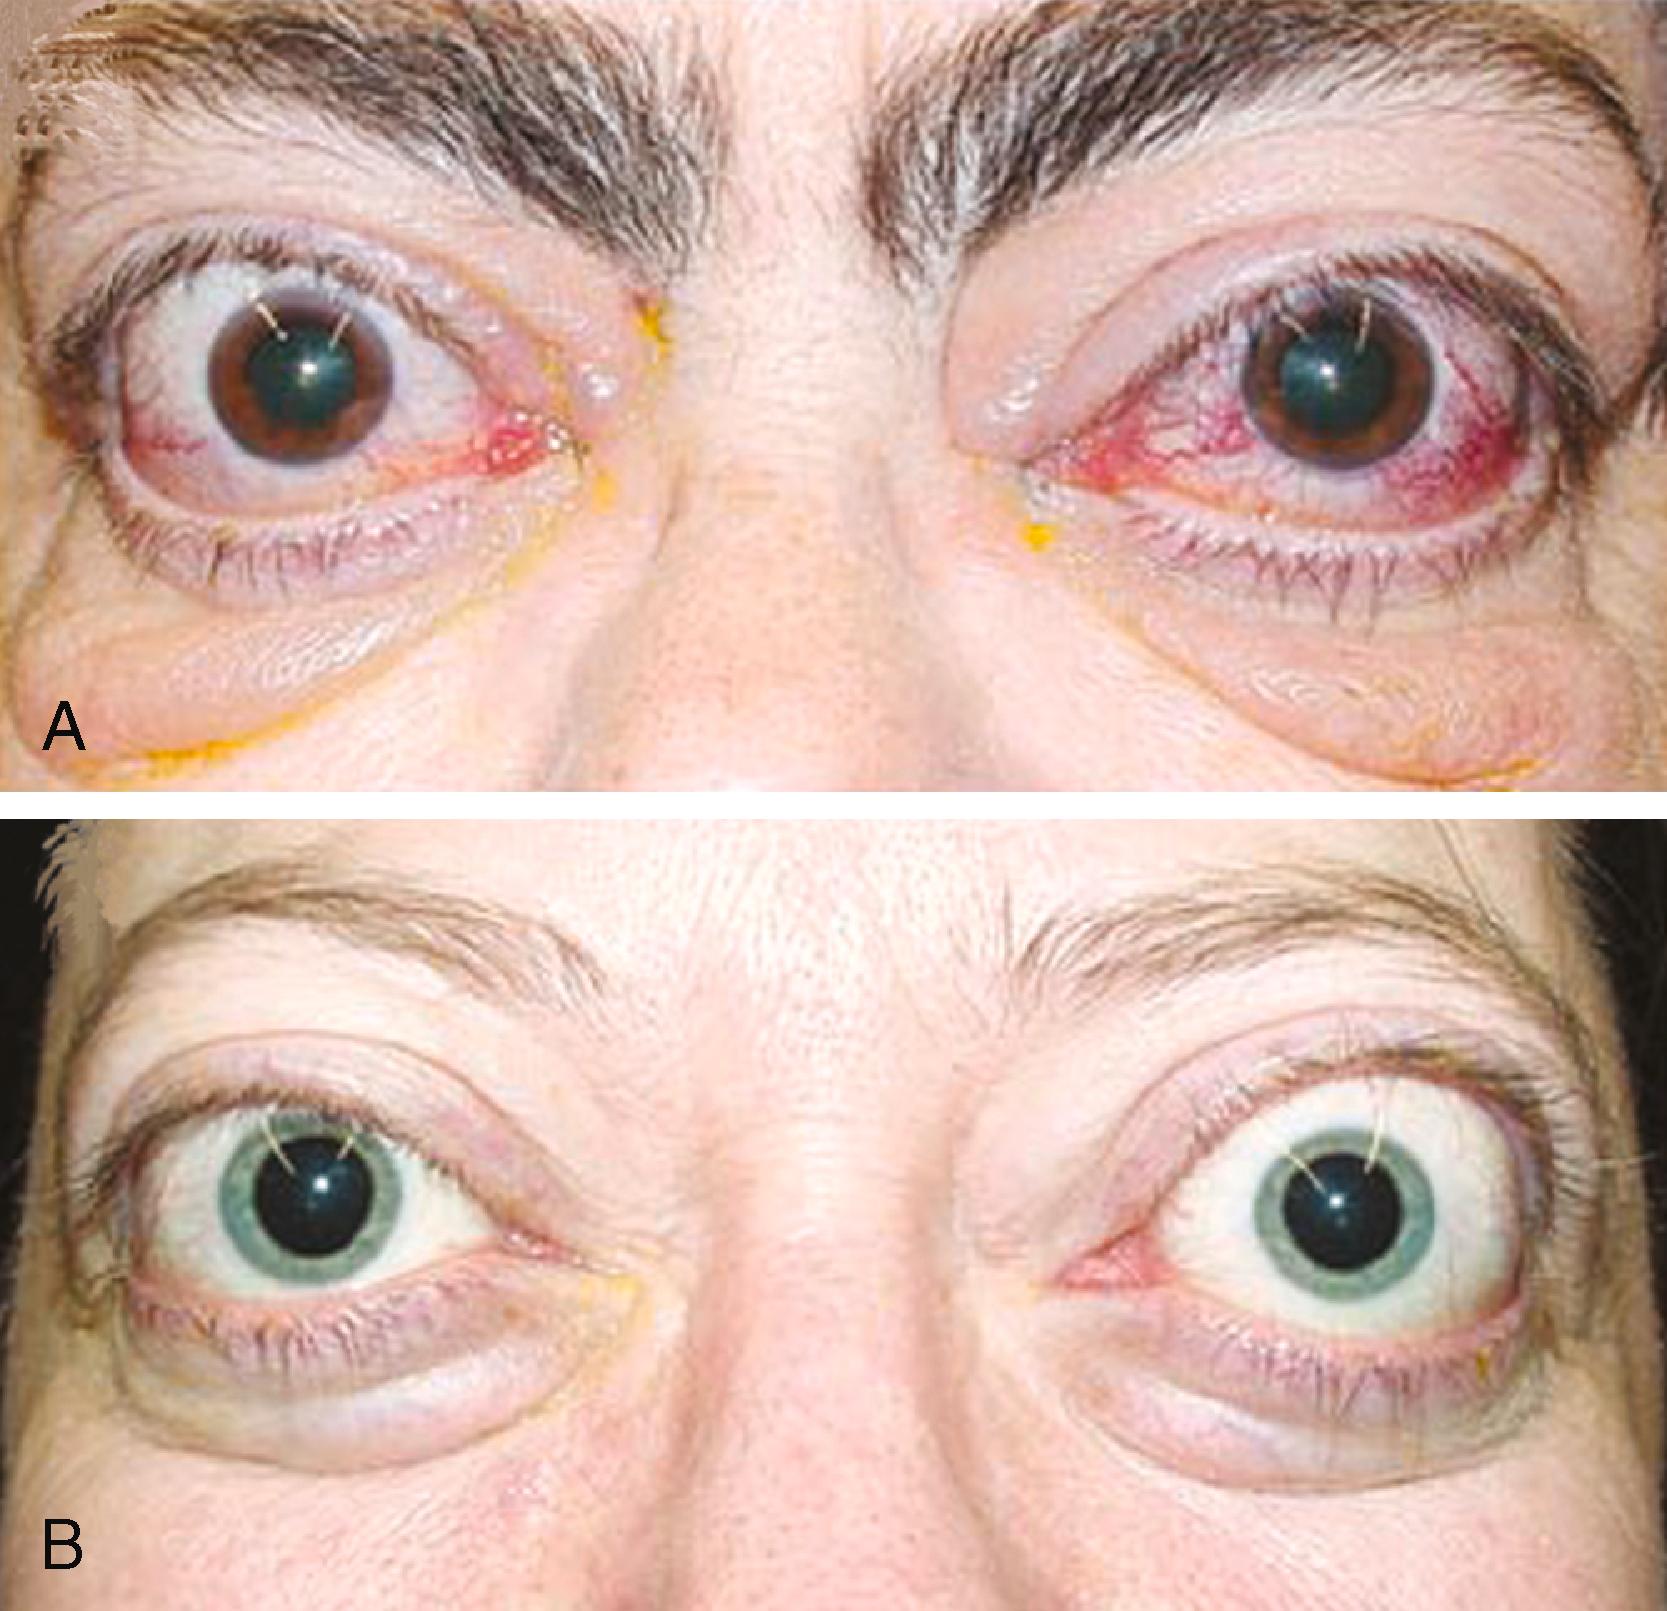 FIGURE 207-2, Graves ophthalmopathy.